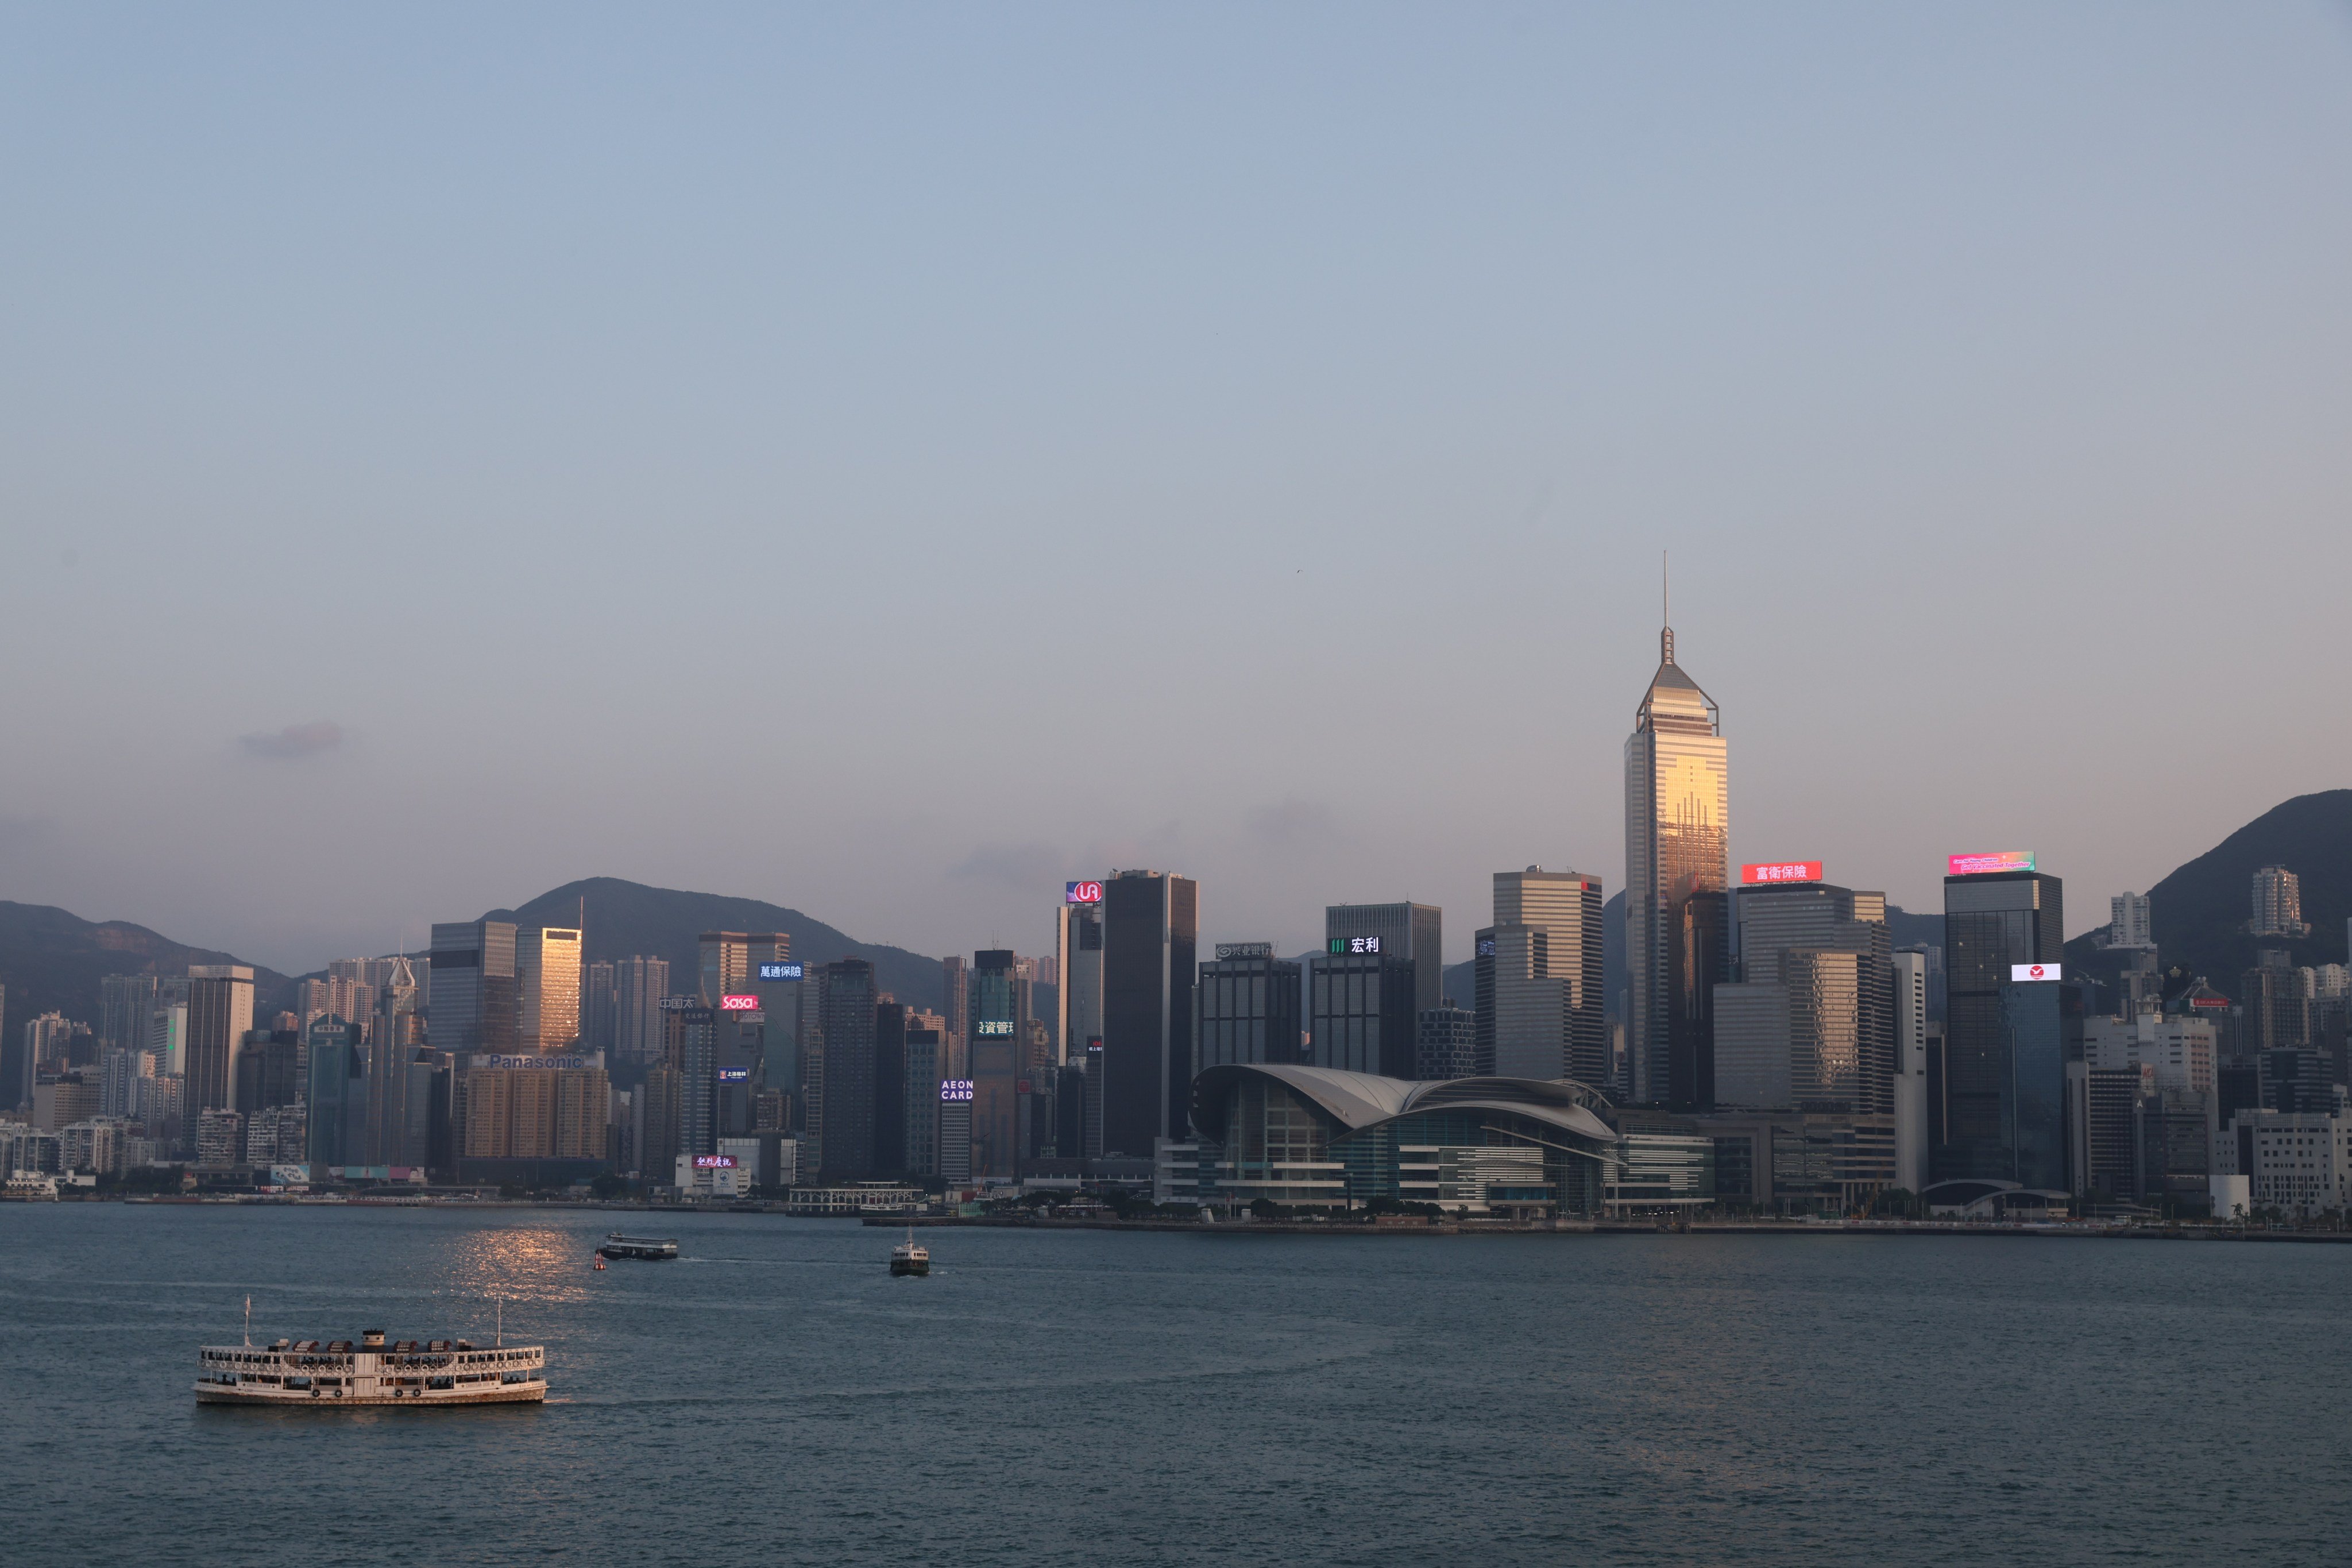 Hong Kong aims to have at least 200 family offices establish or expand their operations in the city by the end of 2025. Photo: Yik Yeung-man